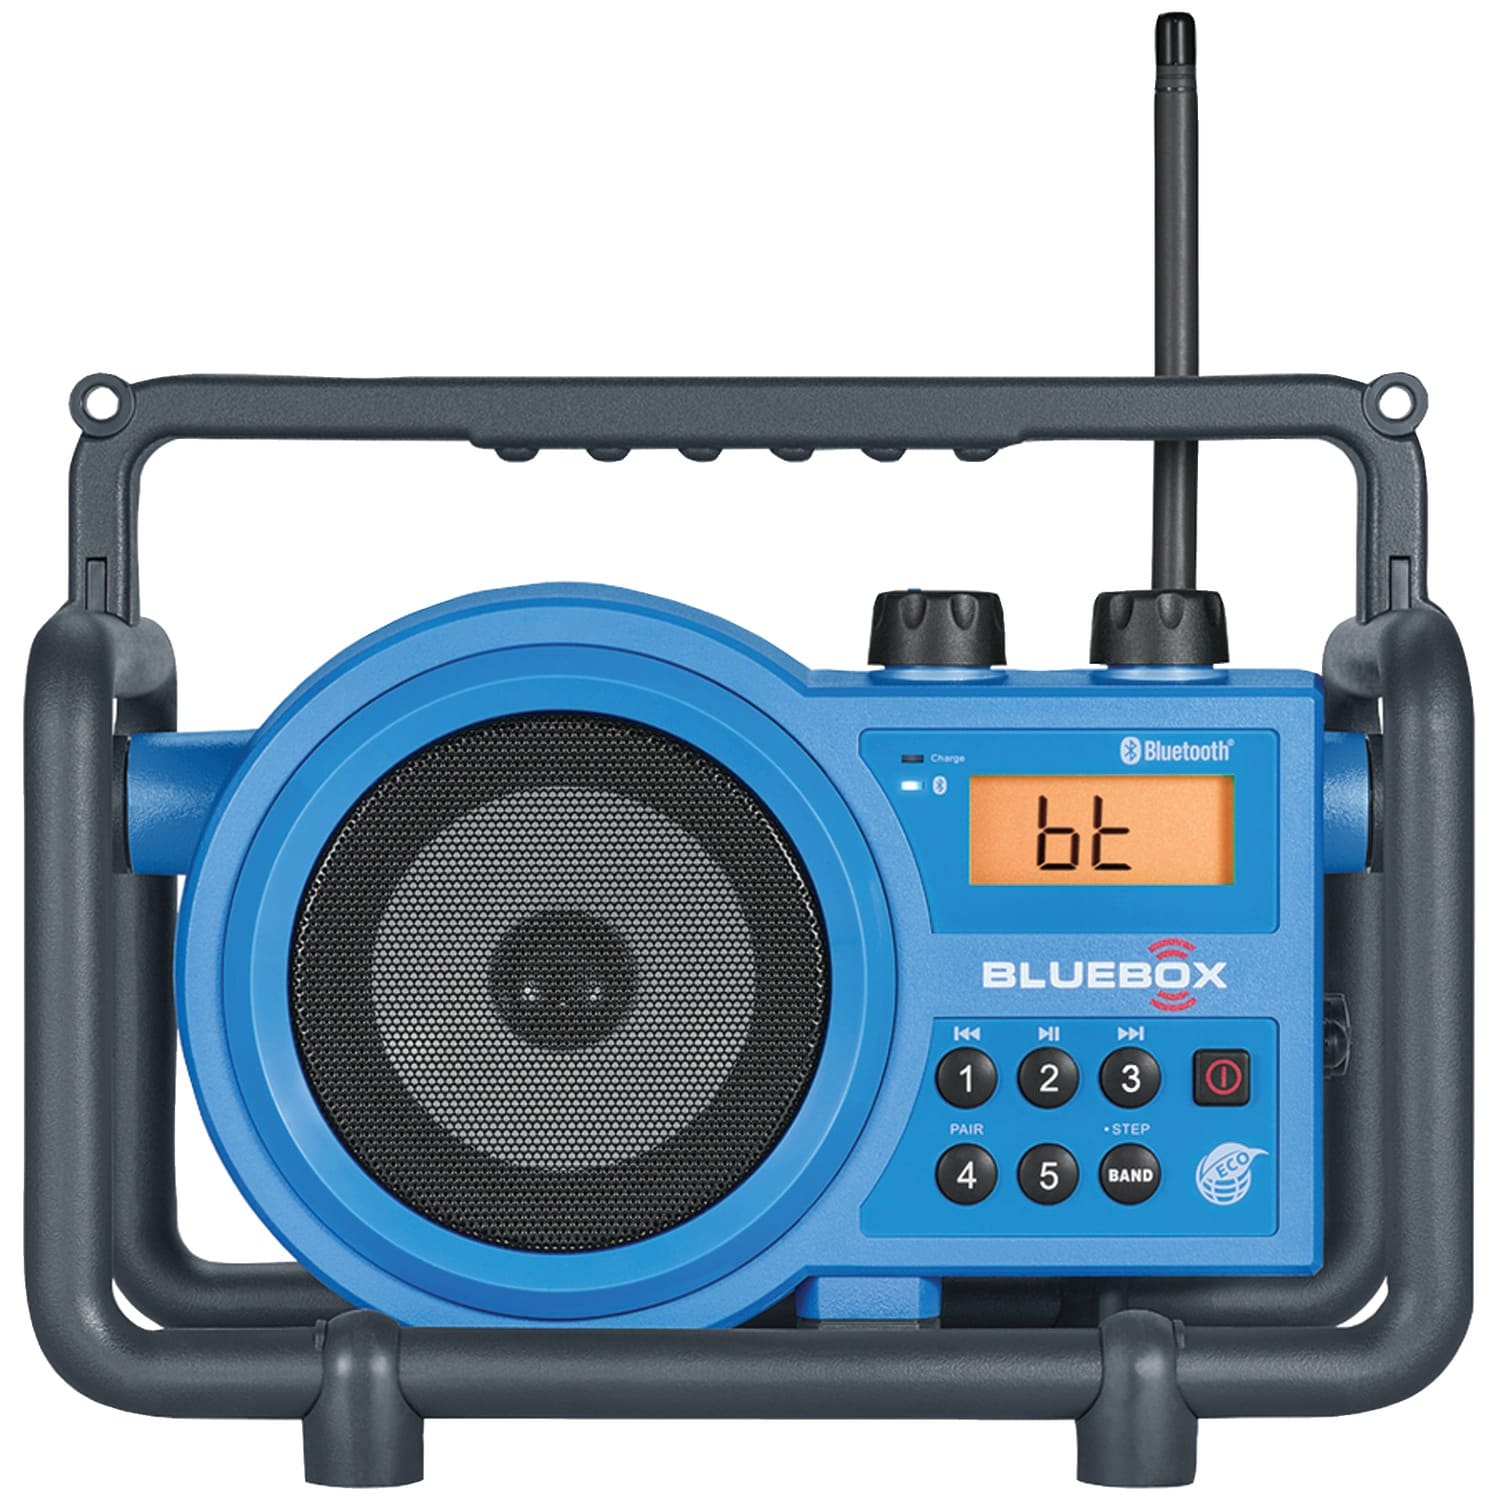 Sangean Portable AM/FM Radio with Digital Display, Headphone Jack, and 10  Preset Stations - Black in the Boomboxes & Radios department at